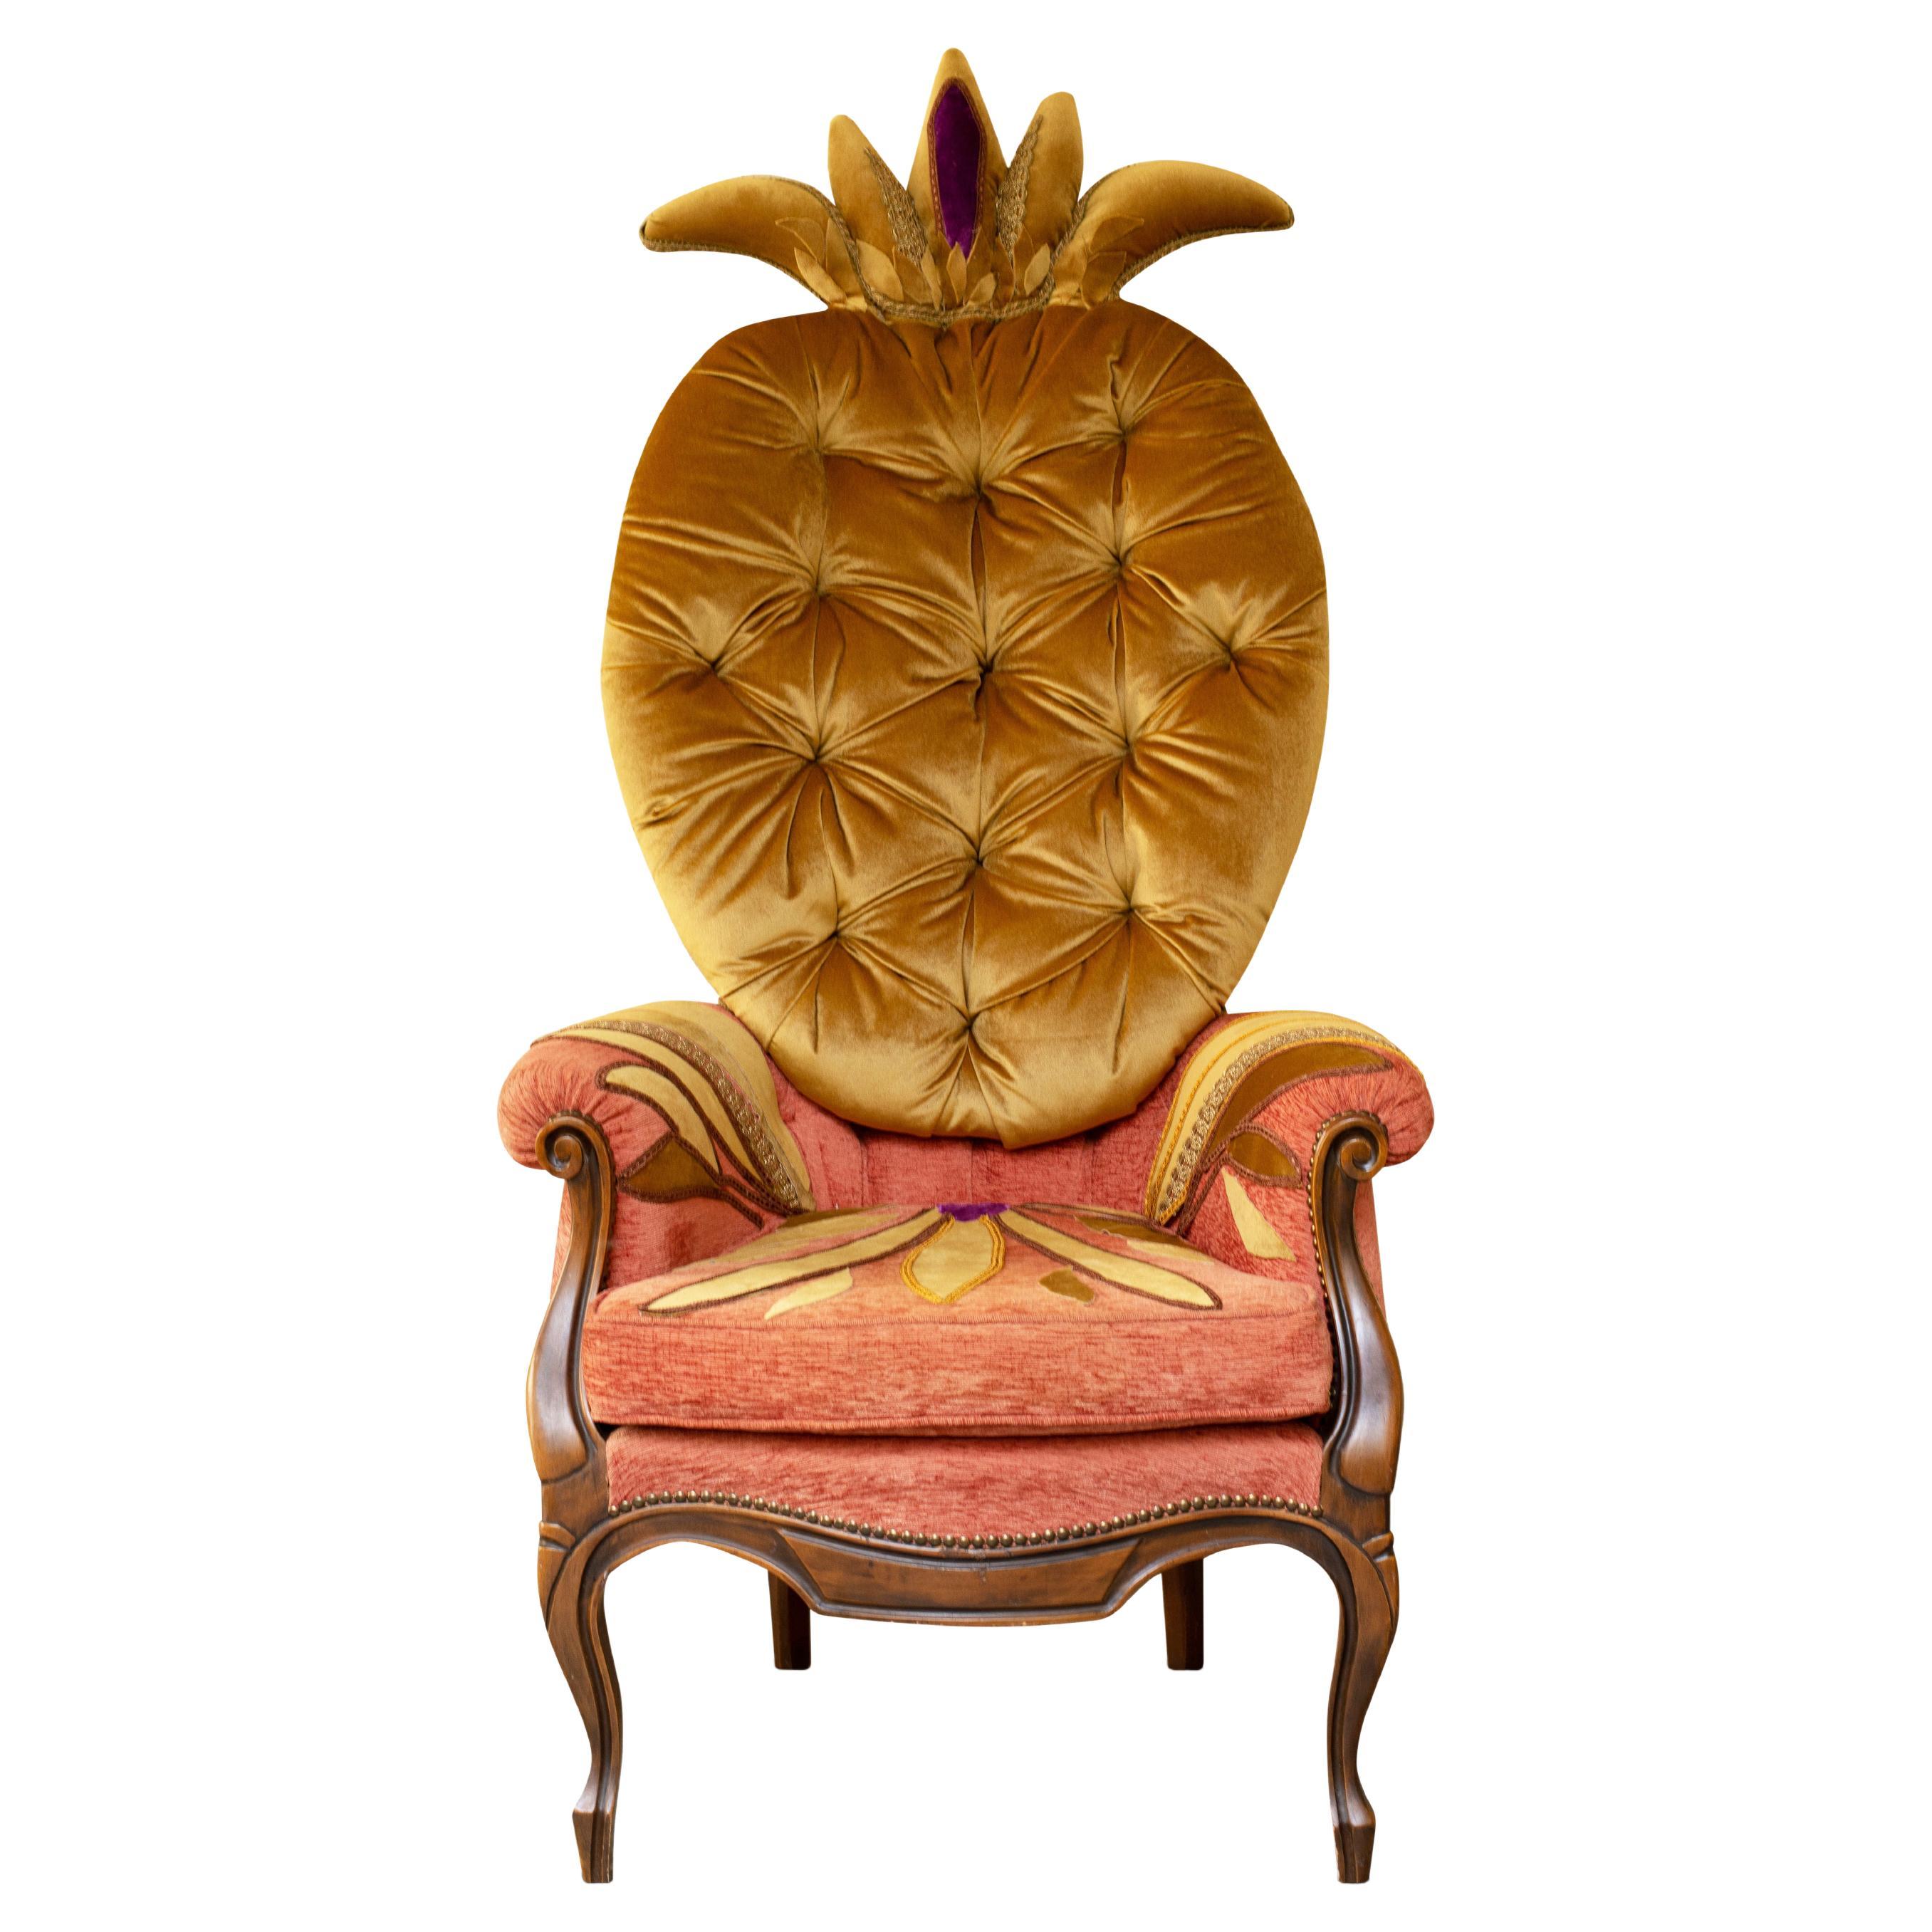 Contemporary Art Armchair - Yellow Pineapple by Carla Tolomeo For Sale